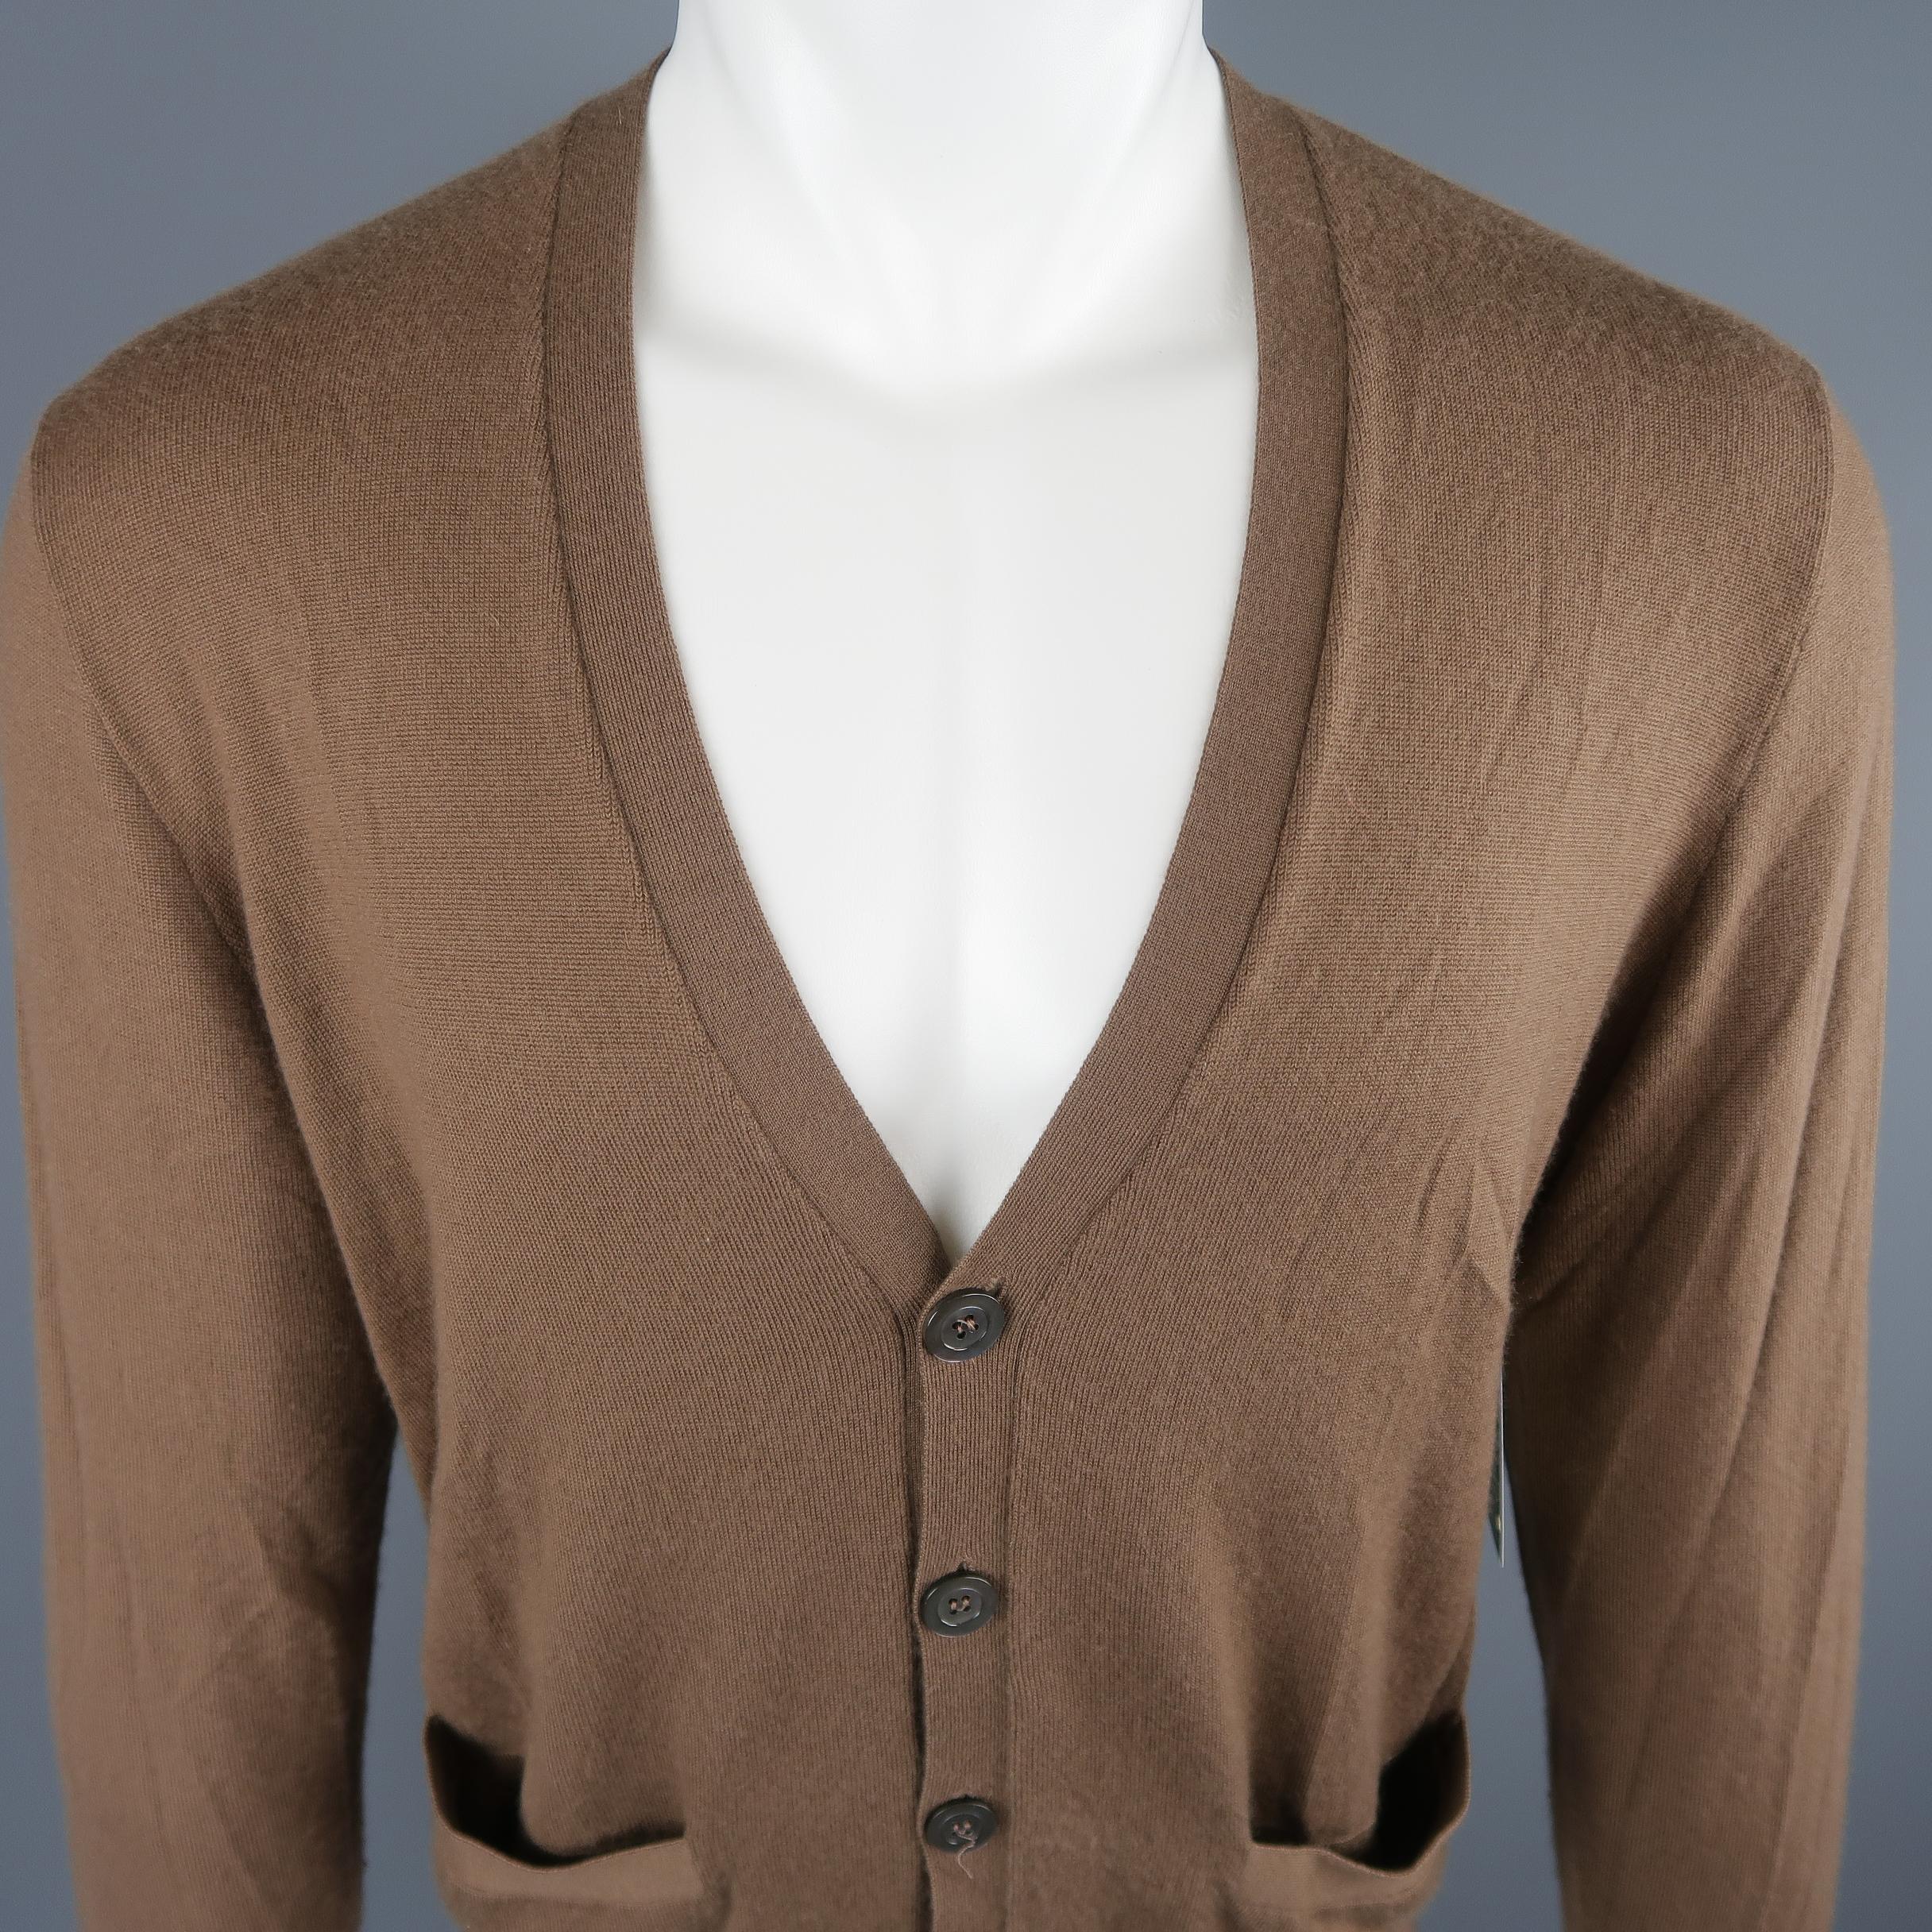 Ralph Lauren Purple Label cardigan come in 100% Cashmere in a solid brown tone knit, with a V-neck button down, frontal pockets  and ribbed cuff and waistband. Made in Italy.
 
Excellent Pre-Owned Condition.
Marked: M
 
Measurements:
 
Shoulder: 17